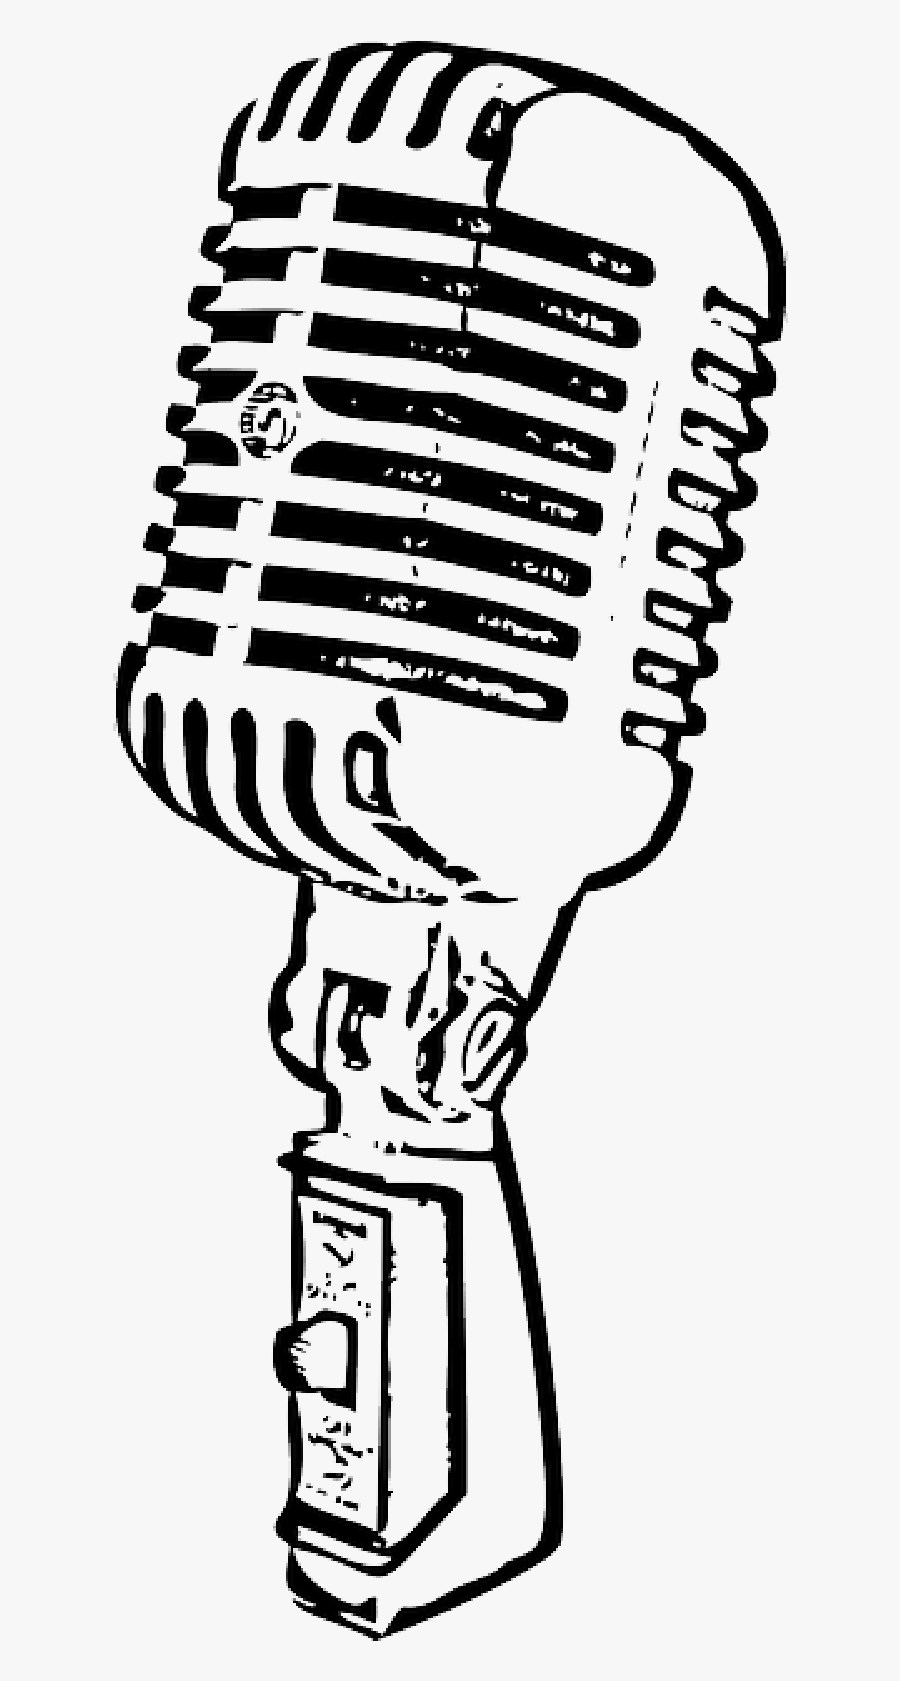 Microphone Clipart Cute Pencil And In Color Microphone - Microphone Drawing Png, Transparent Clipart